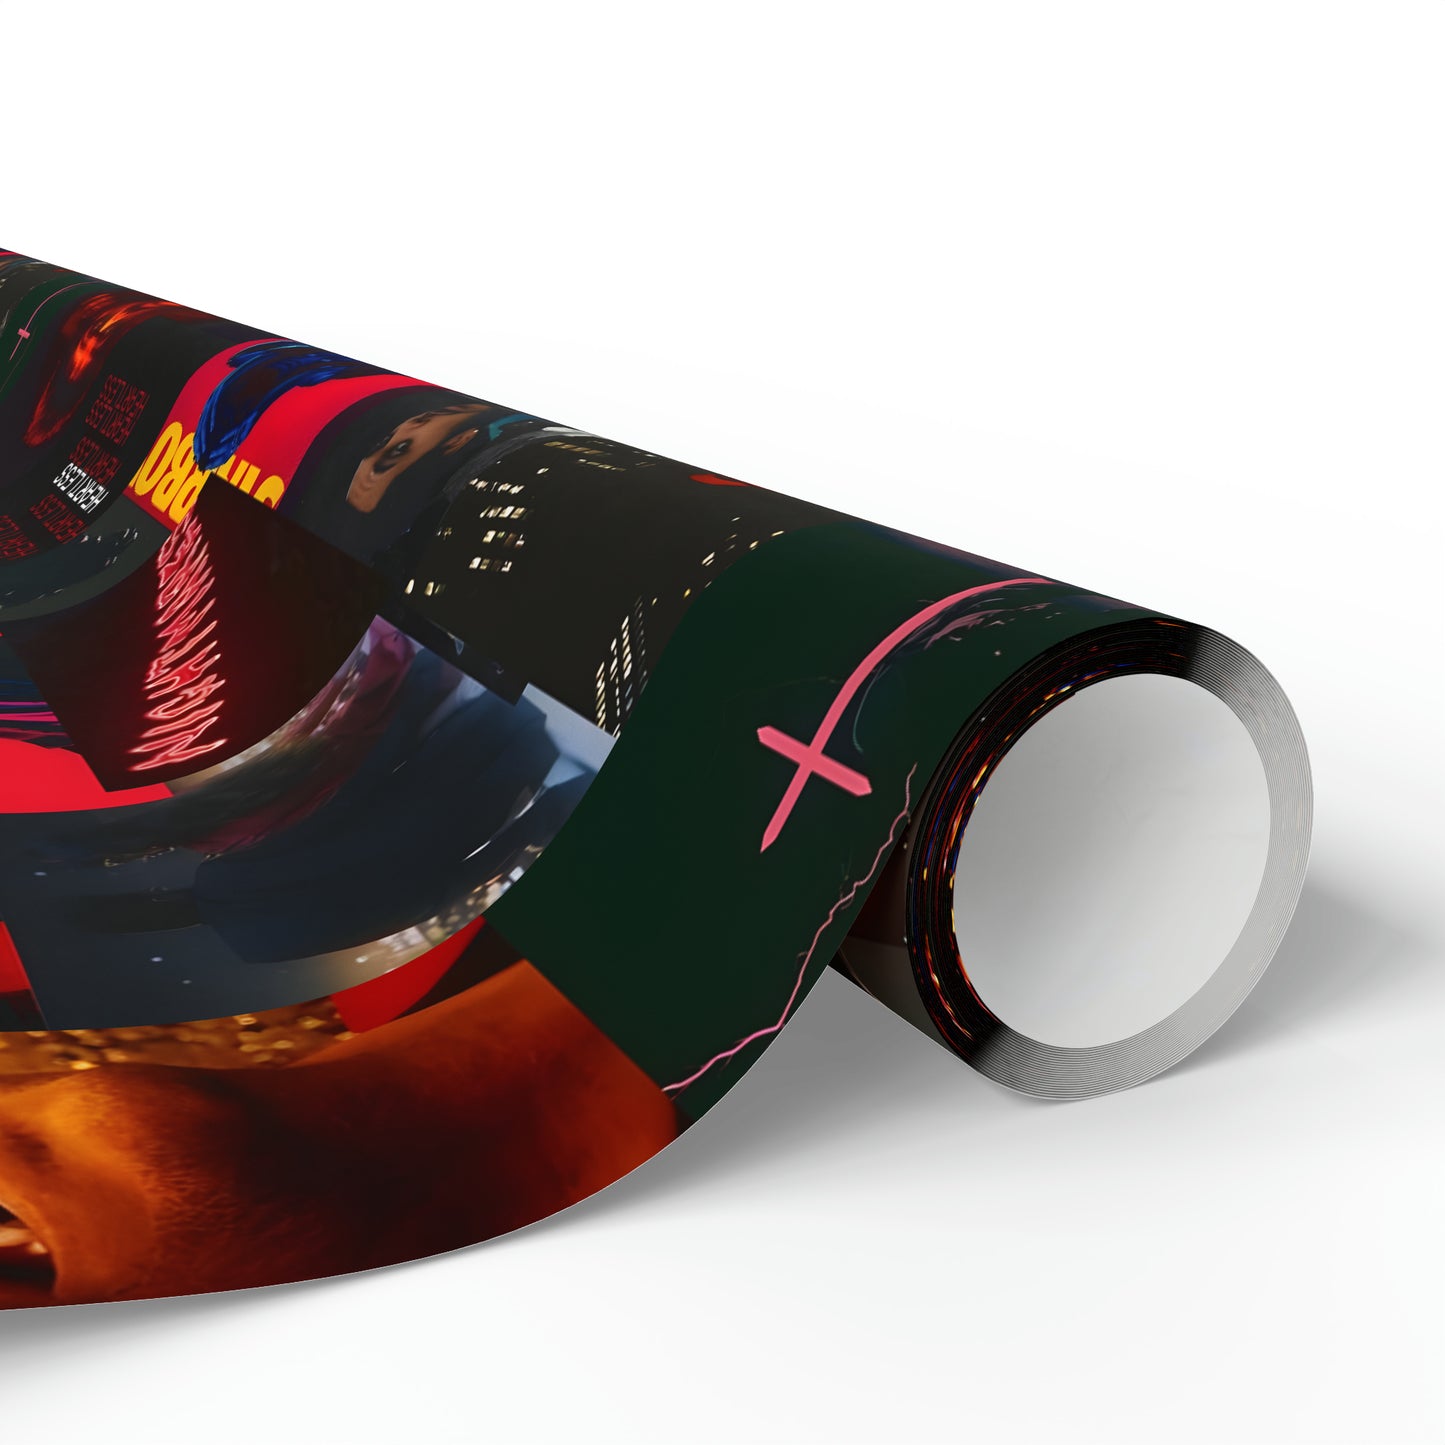 The Weeknd Heartless Nightmares Collage Gift Wrapping Paper